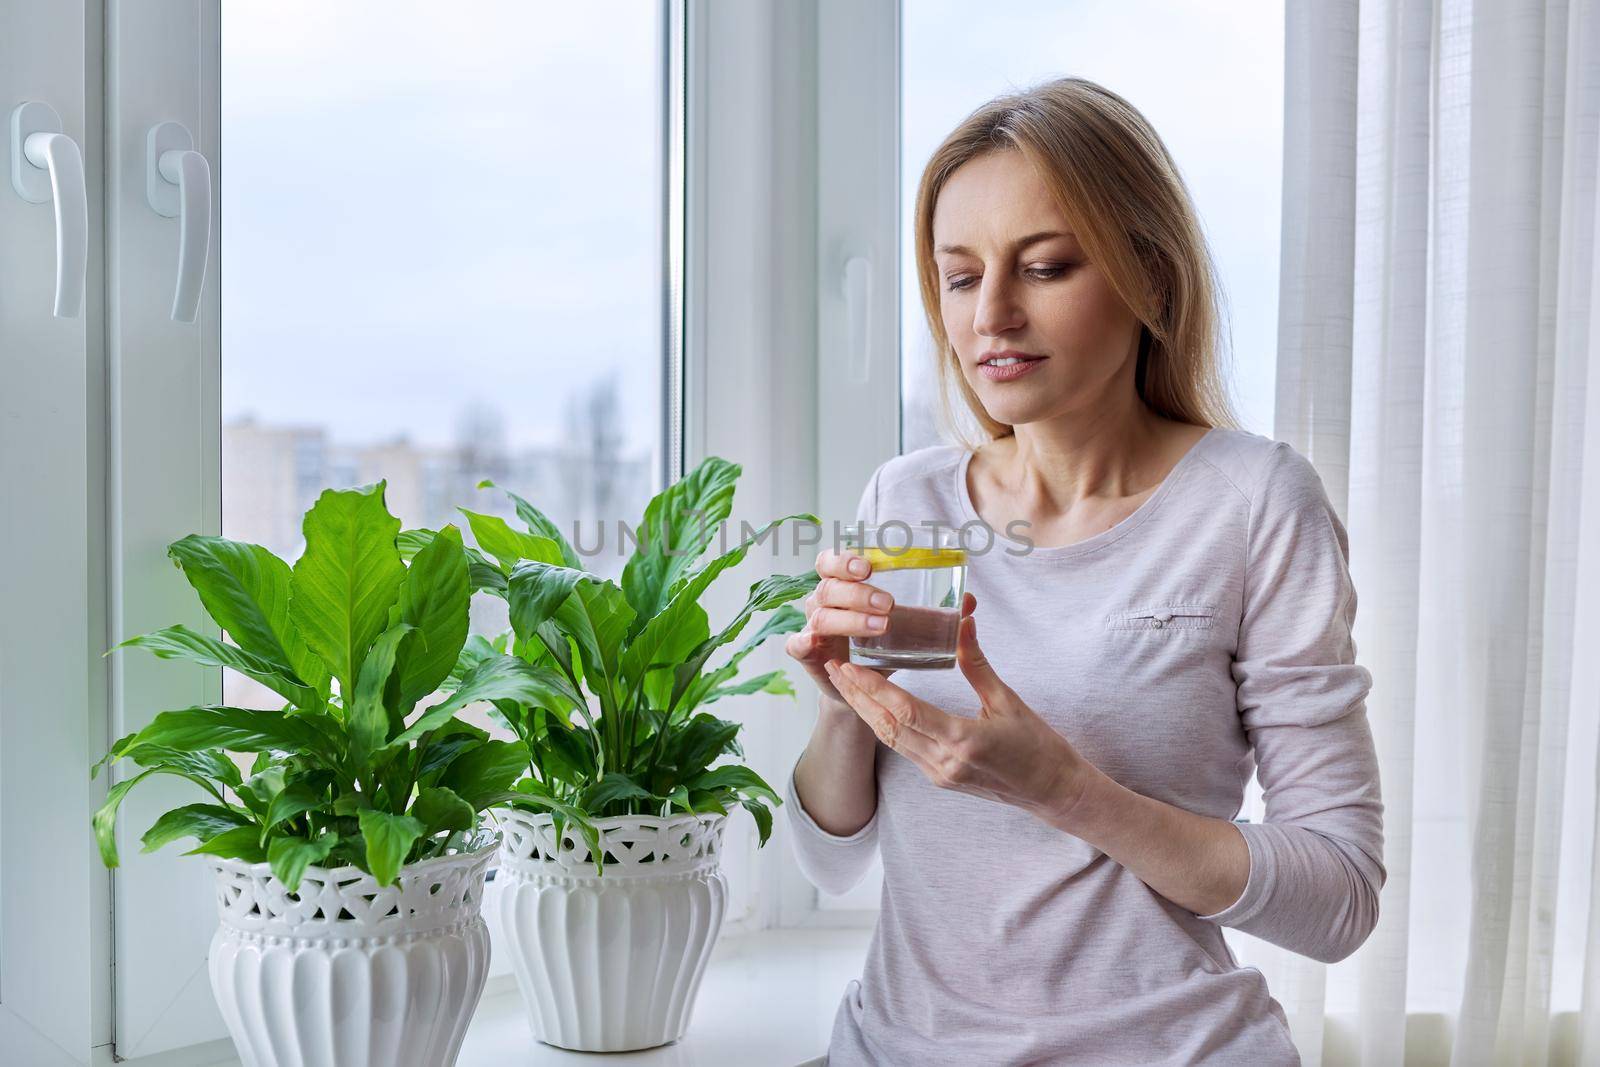 Middle-aged woman drinking lemon water at home near the window, winter autumn season, natural vitamins. Health, nutrition, natural antioxidant, beauty, 40s, mature people, lifestyle concept